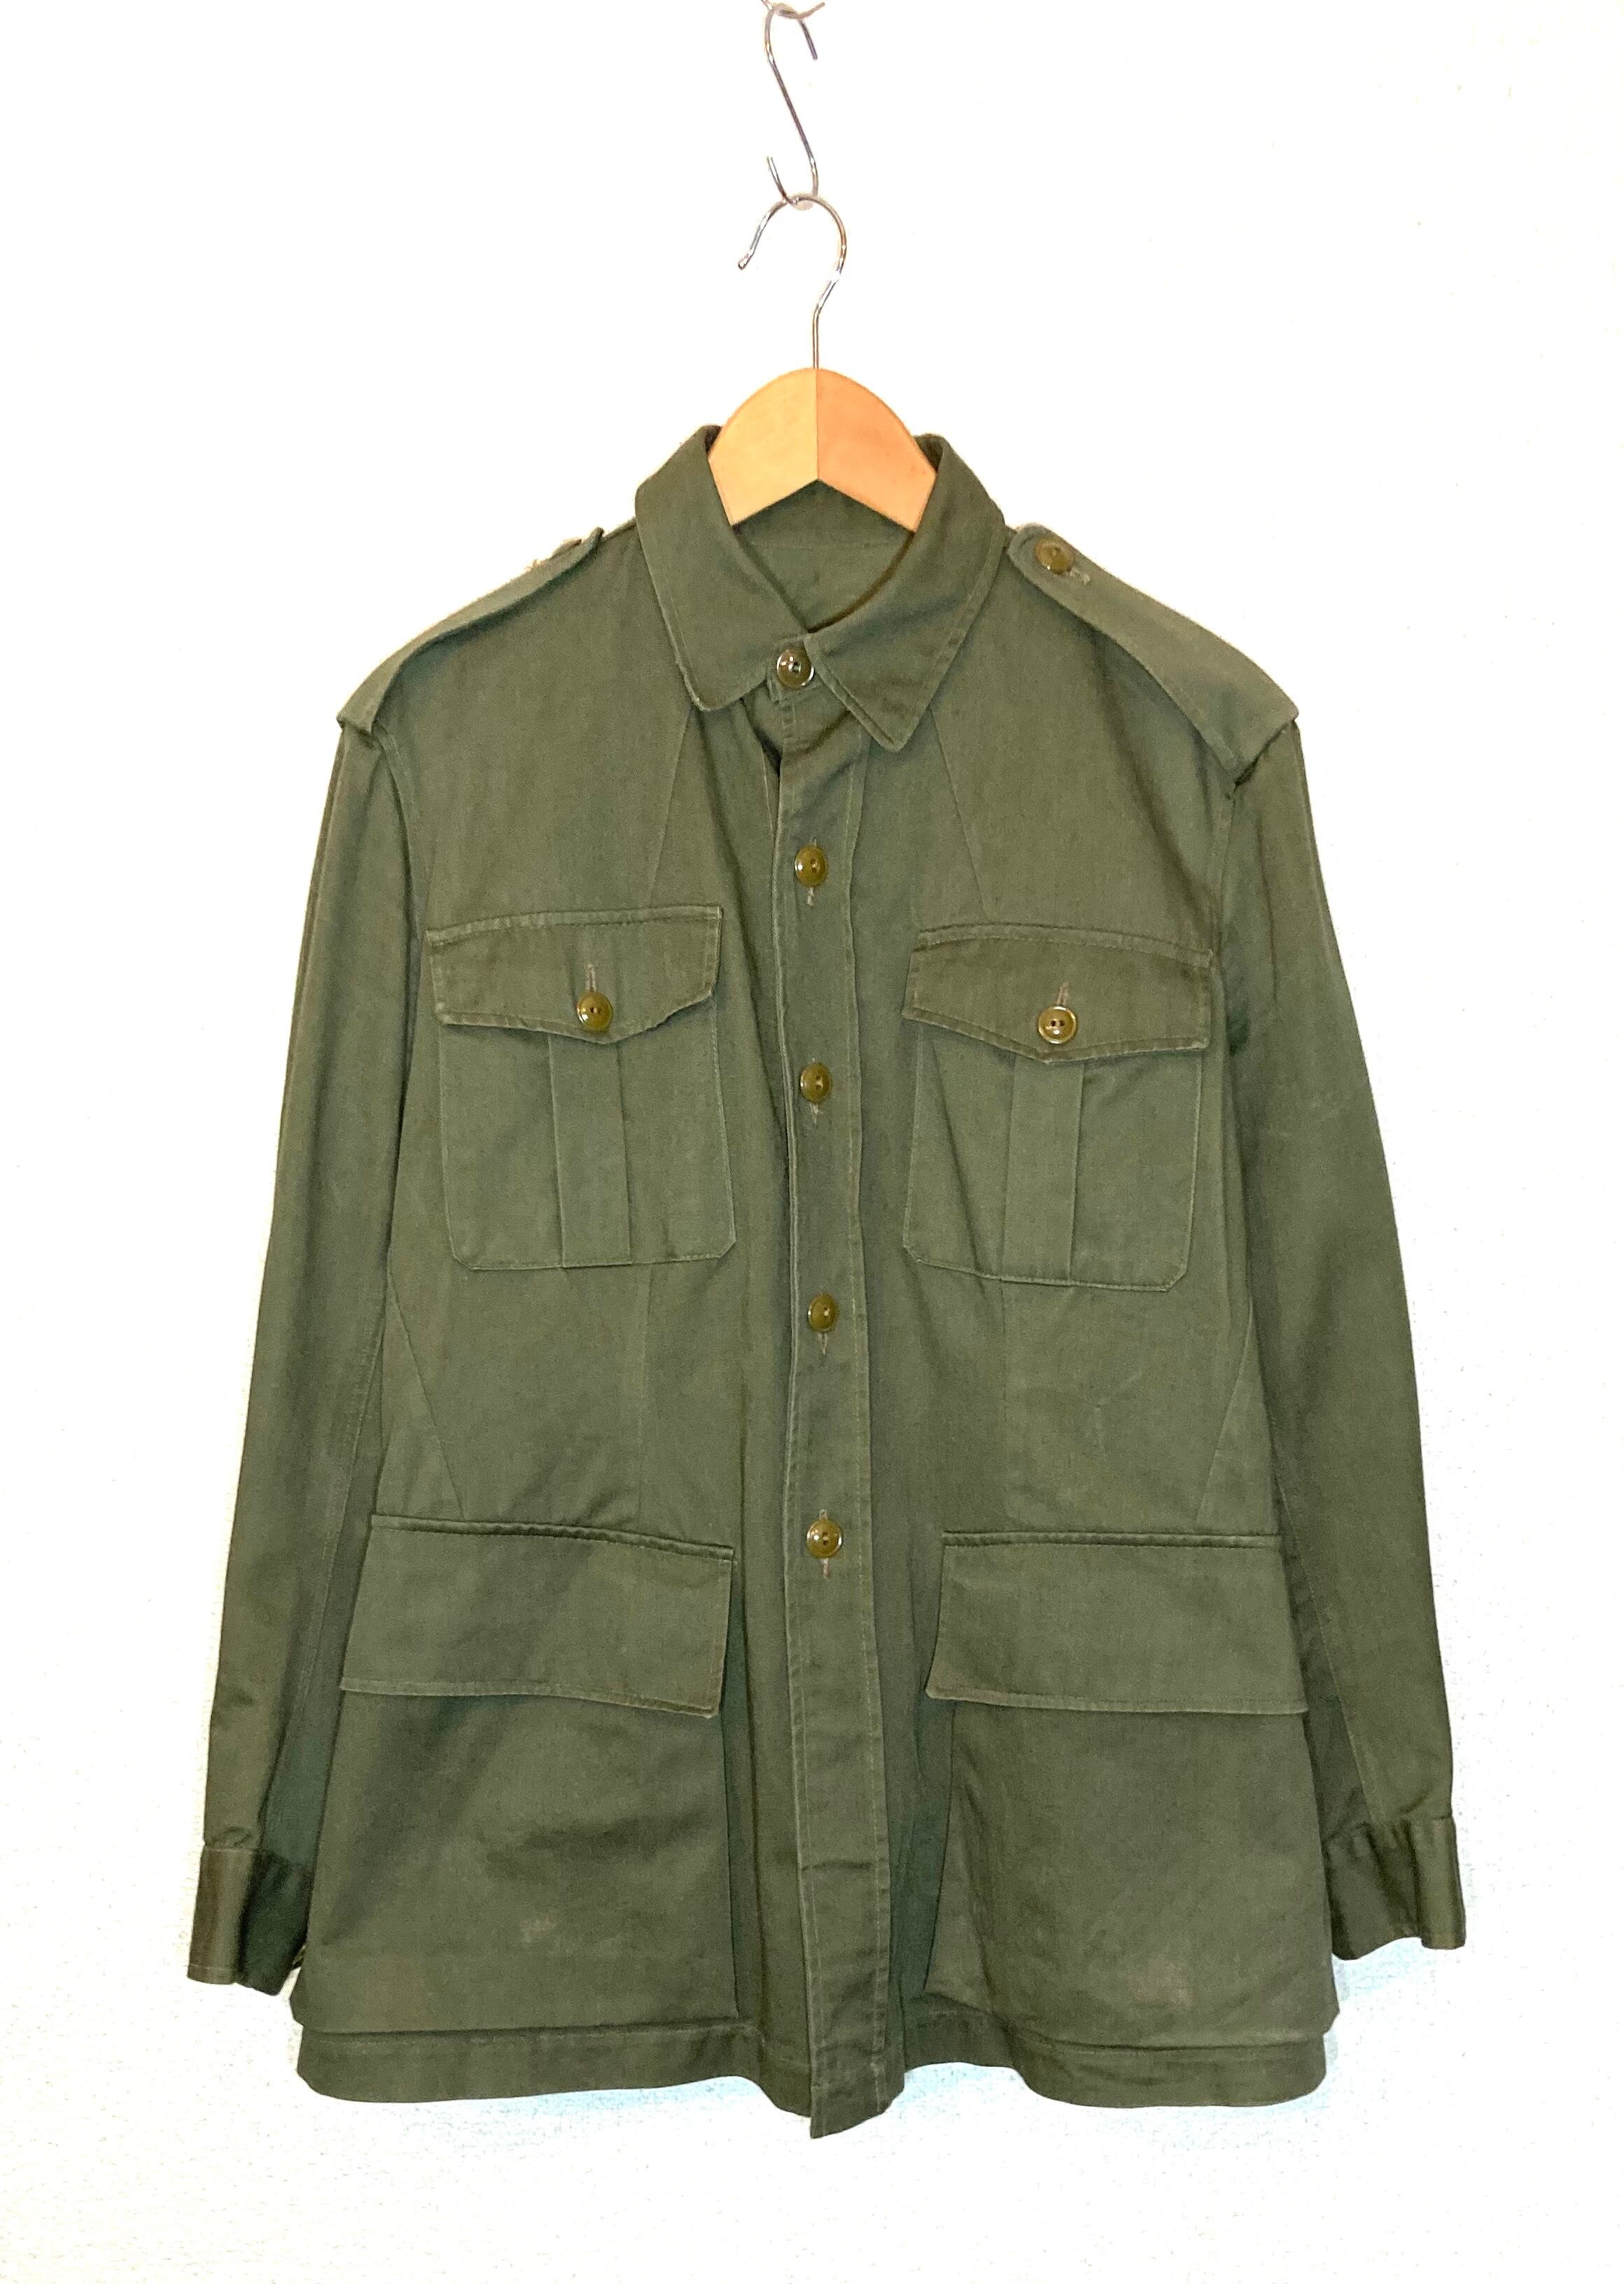 1950s Canadian Army Summer Field Jacket | UNKNOWN